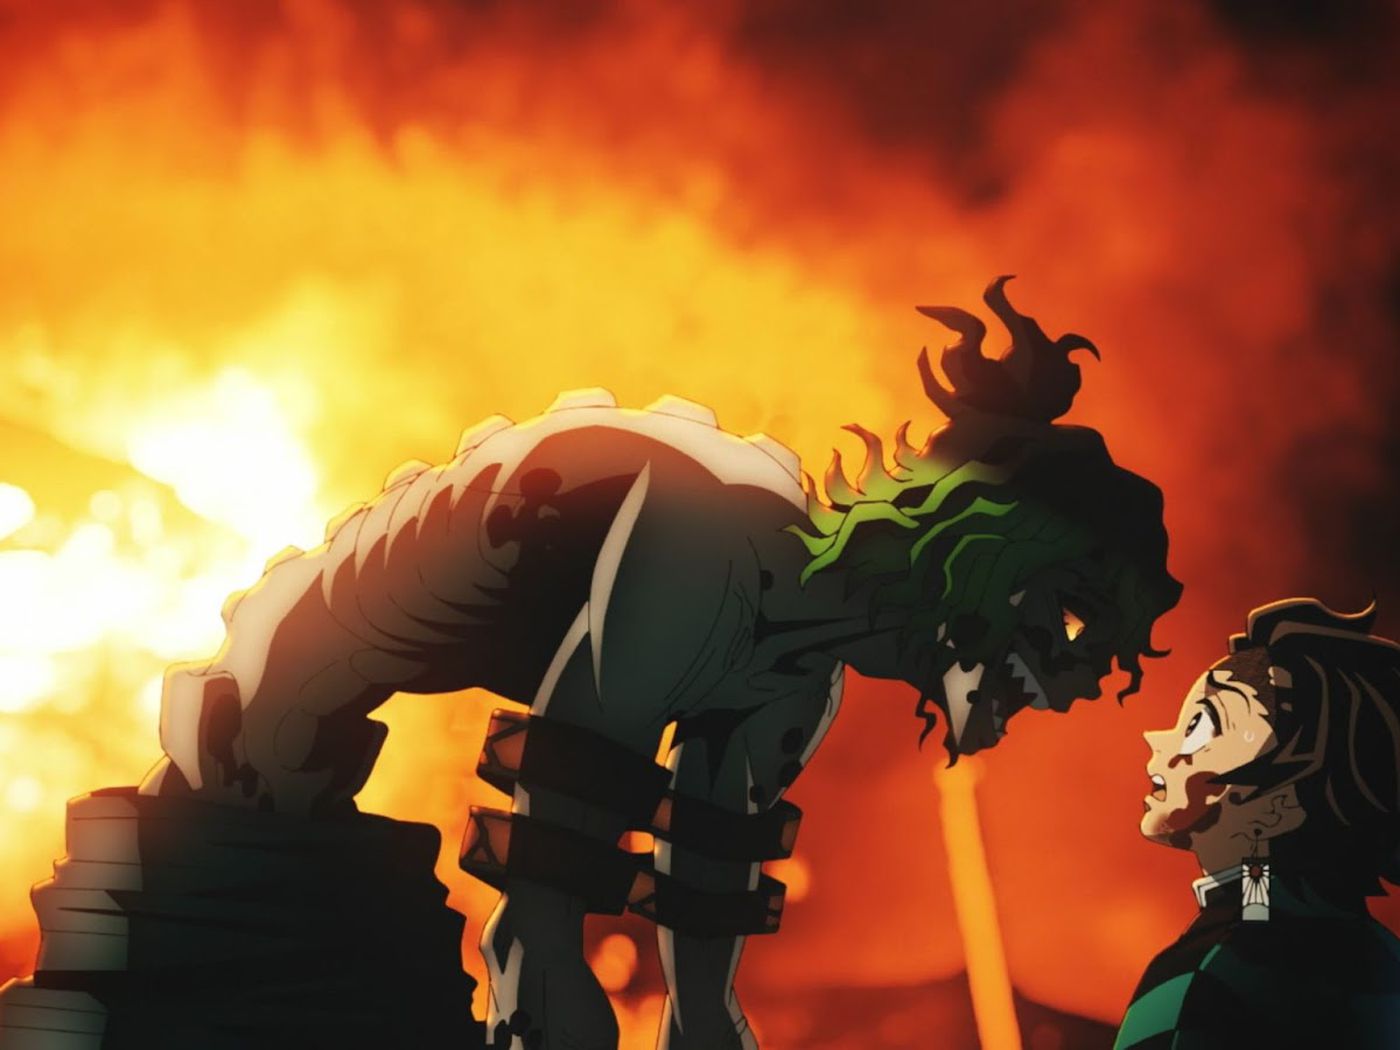 Demon Slayer's Entertainment District Arc Lifted From Real Life Destruction